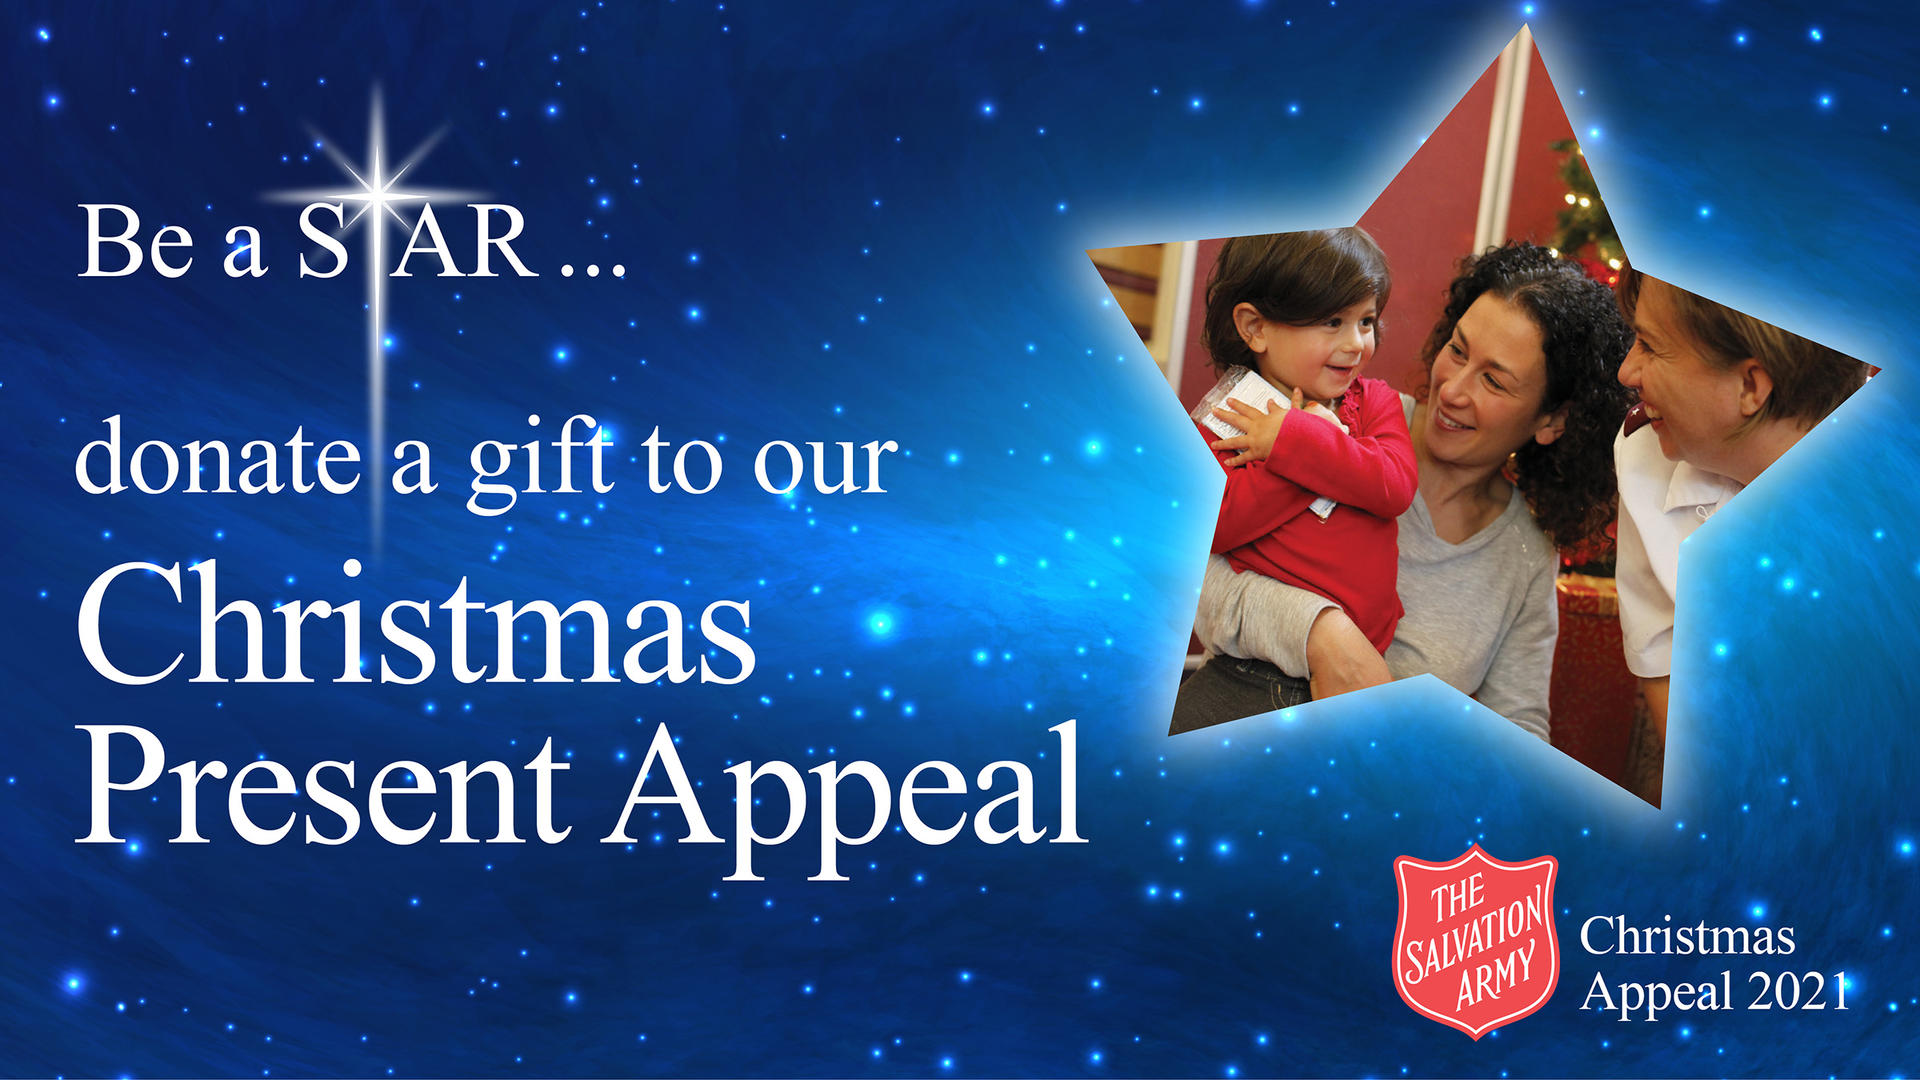 Be a star and donate a gift to our Christmas present appeal